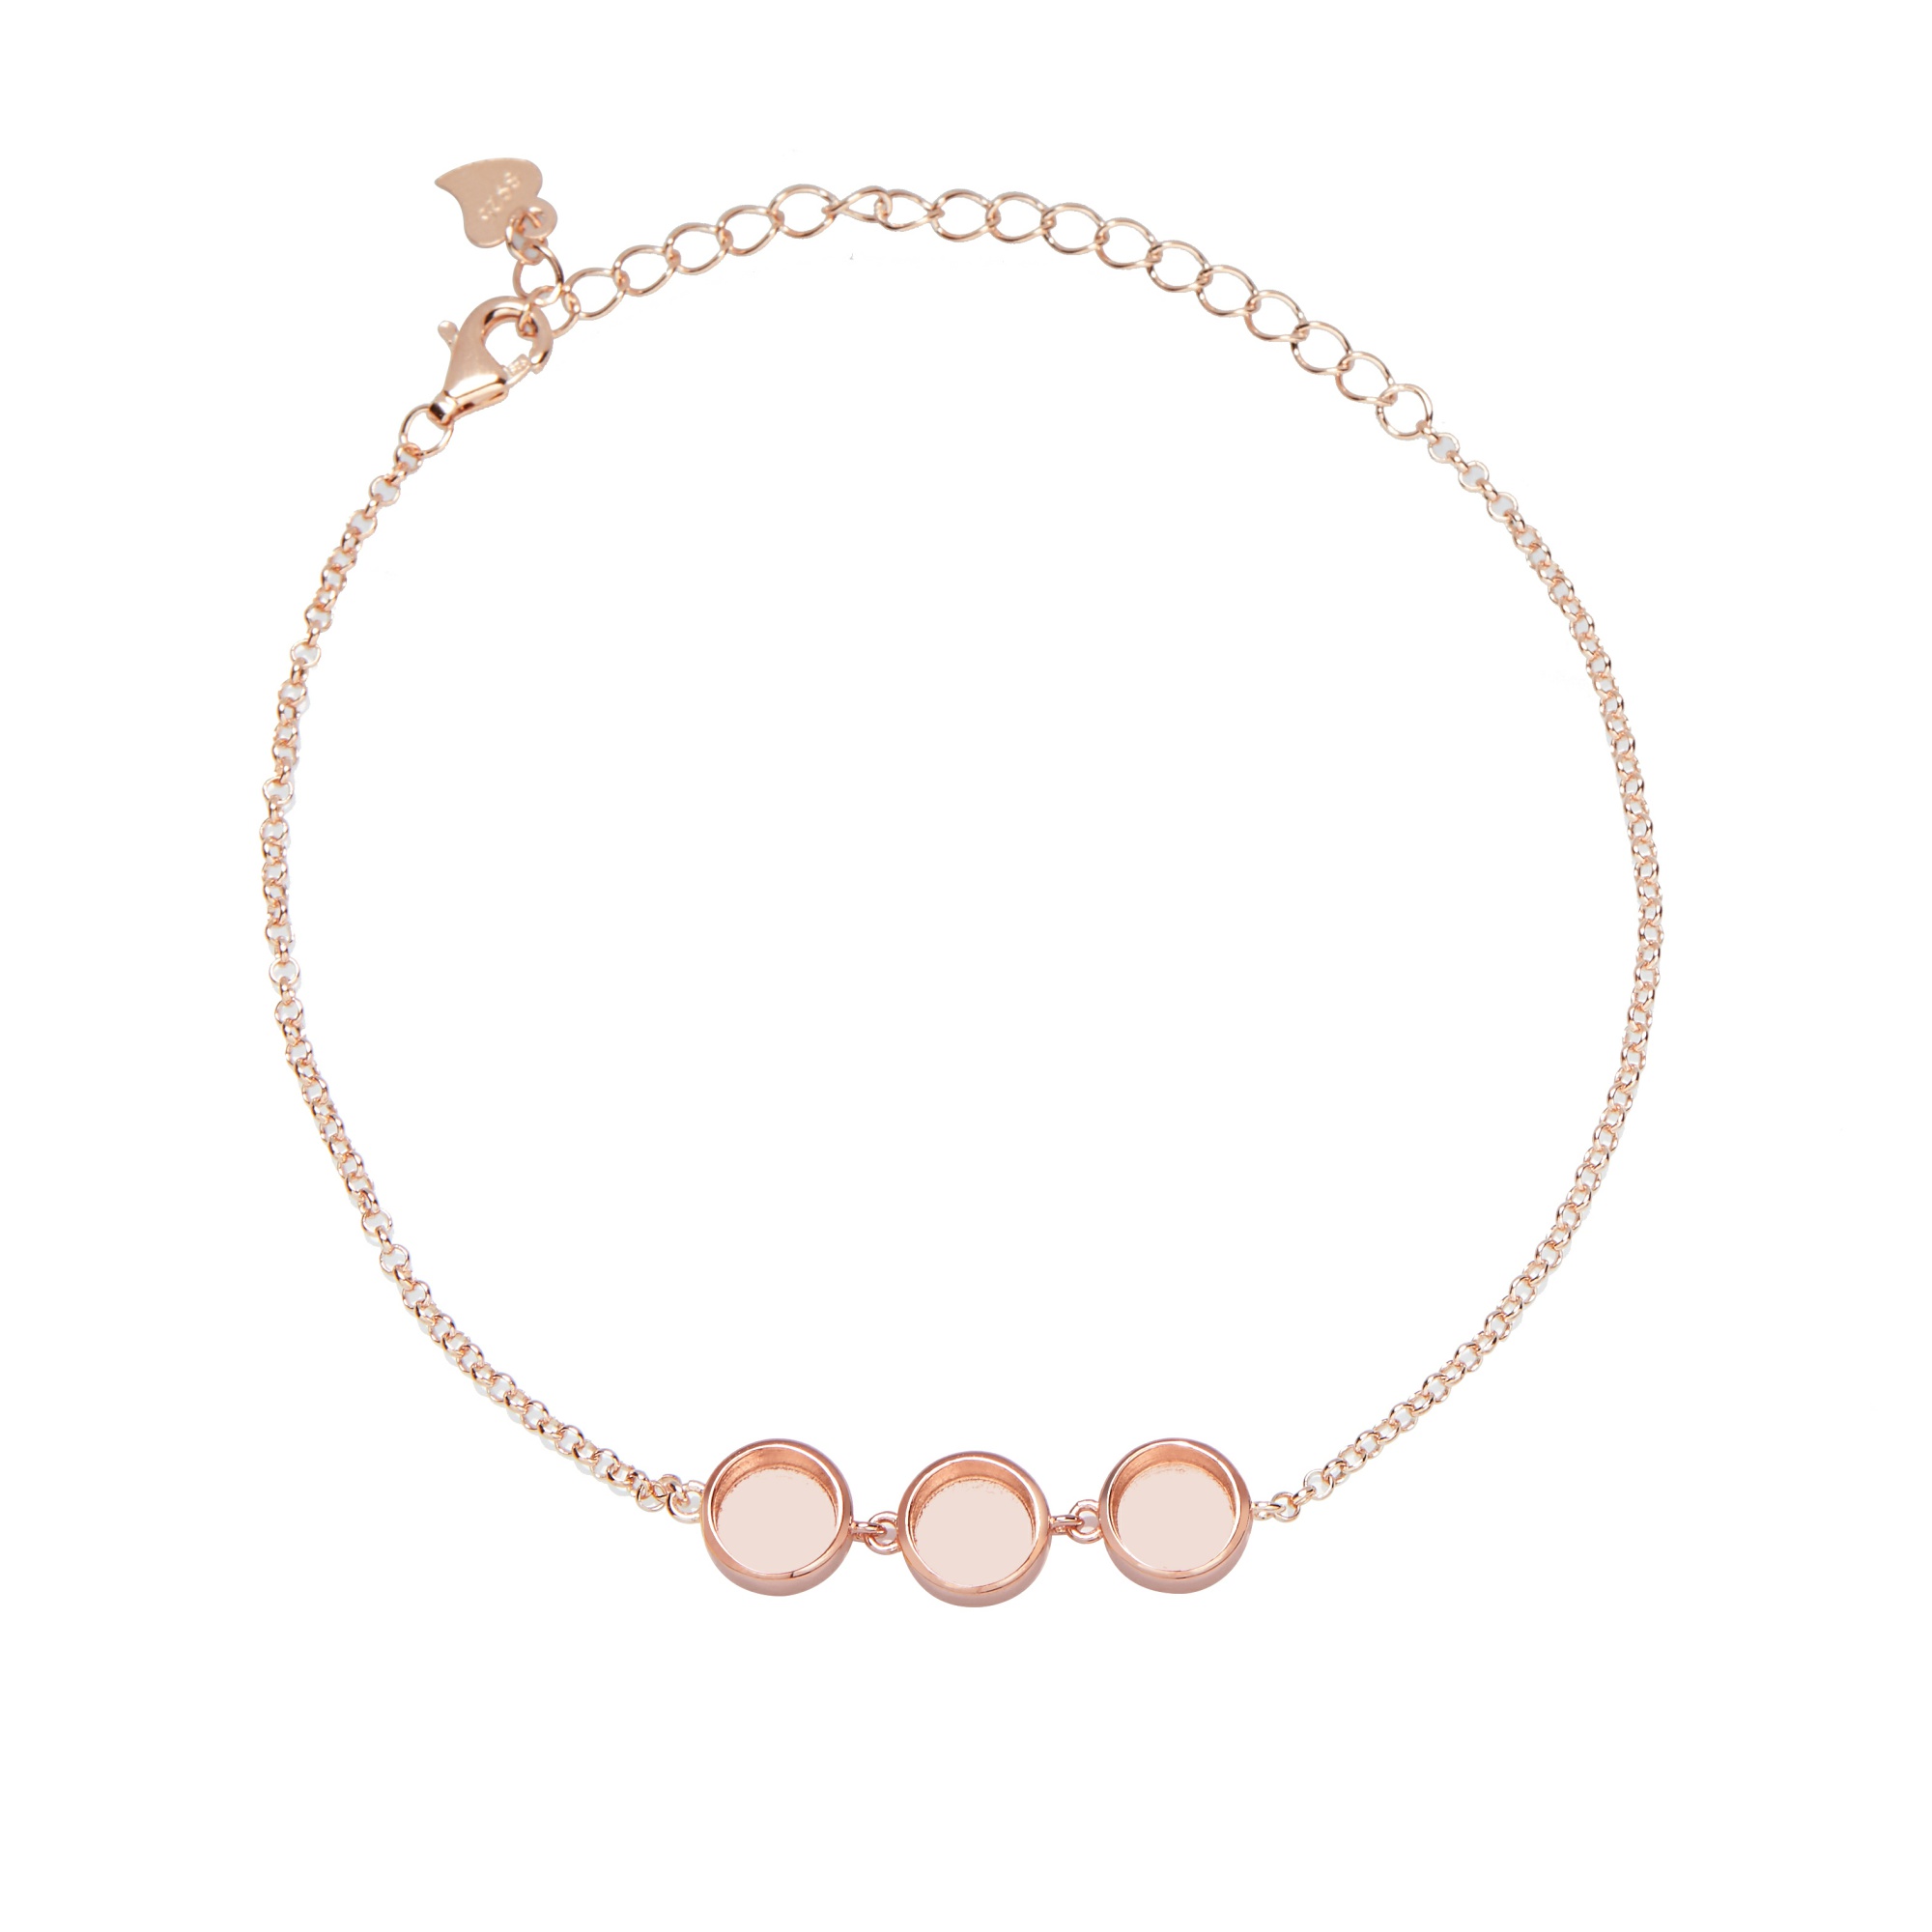 6MM 3 Stone Keepsake Breast Milk Resin Round Bracelet Bezel Settings,Solid 925 Sterling Silver Rose Gold Plated Bracelet Bezel With Chain 6.8''+2' 1900295 - Click Image to Close